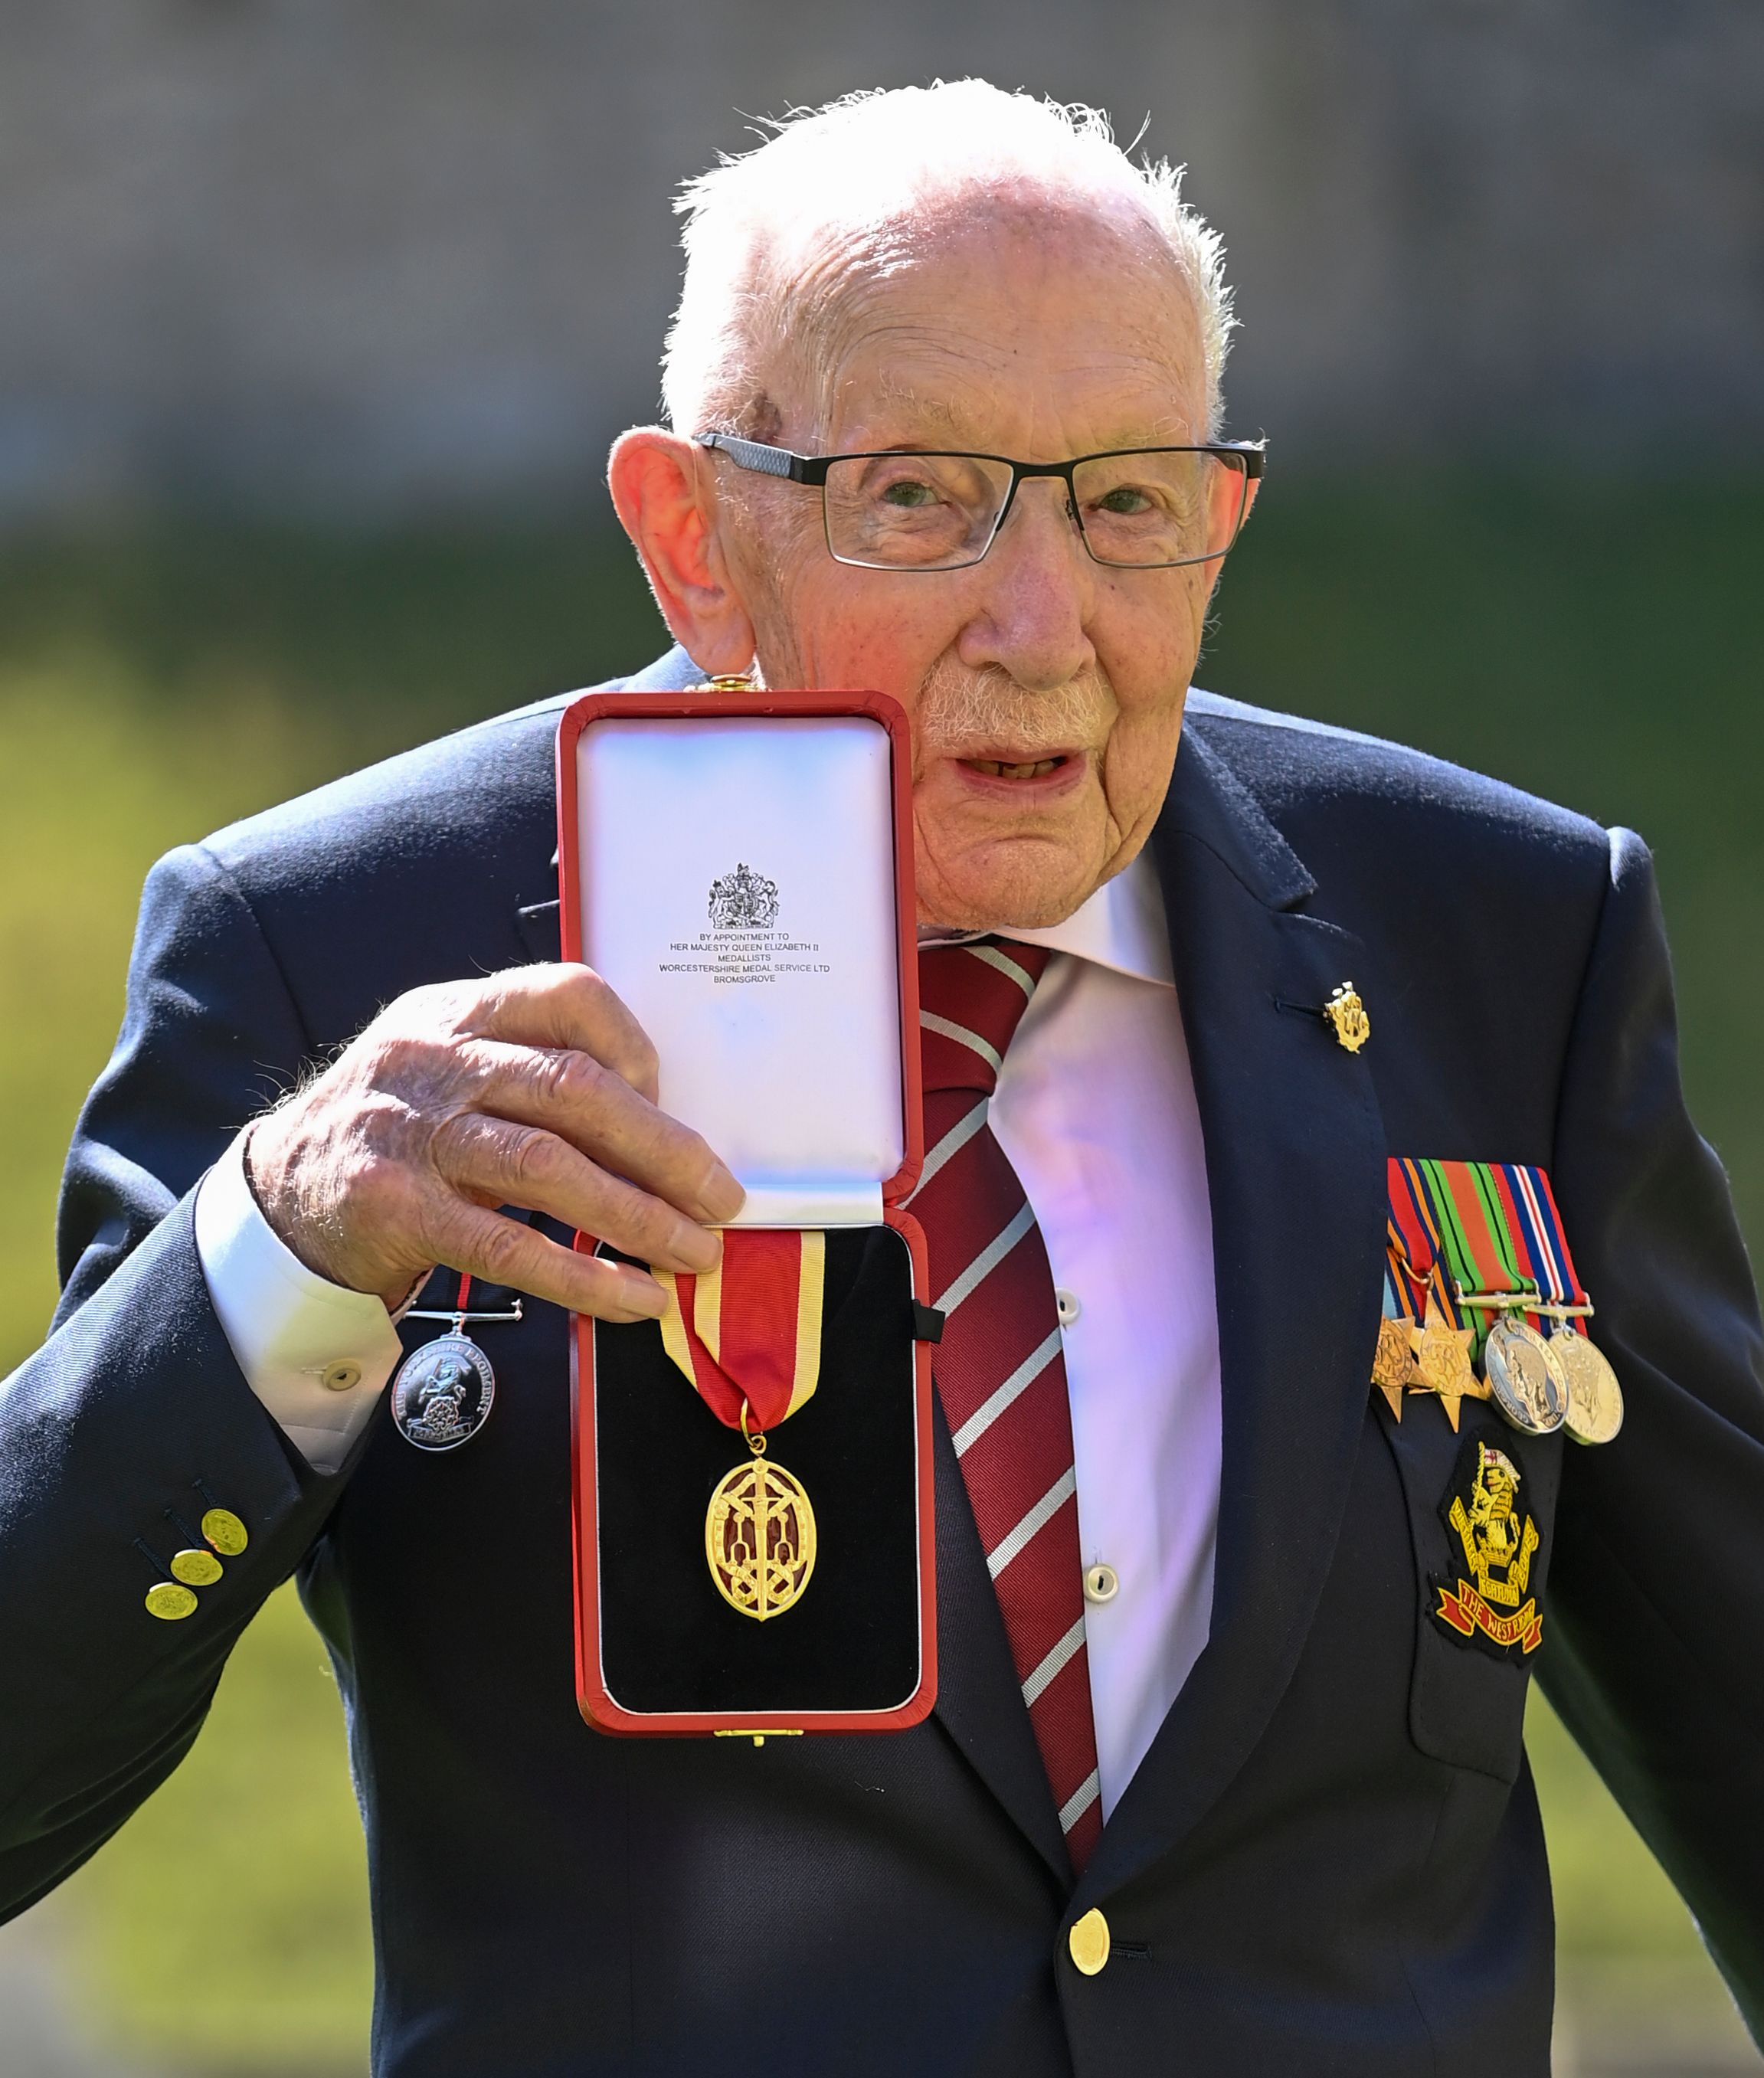 <p>Captain Sir Tom Moore -- the 100-year-old WWII veteran who catapulted to fame in 2020 when he helped raise more than $43 million for Britain's National Health Service charities in the early days of the U.K.'s coronavirus lockdowns by walking more than 100 laps in the garden of his home in Bedfordshire, England -- has died after being diagnosed with COVID-19, his family announced on Feb. 2. Captain Sir Tom, <a href="https://www.wonderwall.com/celebrity/royals/royals-news-you-need-to-know-for-july-2020-367258.gallery?photoId=367337">who was knighted for his fundraising efforts by Queen Elizabeth II in July 2020</a>, was admitted to the hospital on Jan. 31 after being treated for pneumonia and testing positive for the coronavirus the previous week, Sky News reported. "The last year of our father's life was nothing short of remarkable," daughters Hannah and Lucy said in a statement. "He was rejuvenated and experienced things he'd only ever dreamed of." Buckingham Palace tweeted that "The Queen is sending a private message of condolence to the family of Captain Sir Tom Moore. Her Majesty very much enjoyed meeting Captain Sir Tom and his family at Windsor last year. Her thoughts and those of the Royal Family are with them."</p>